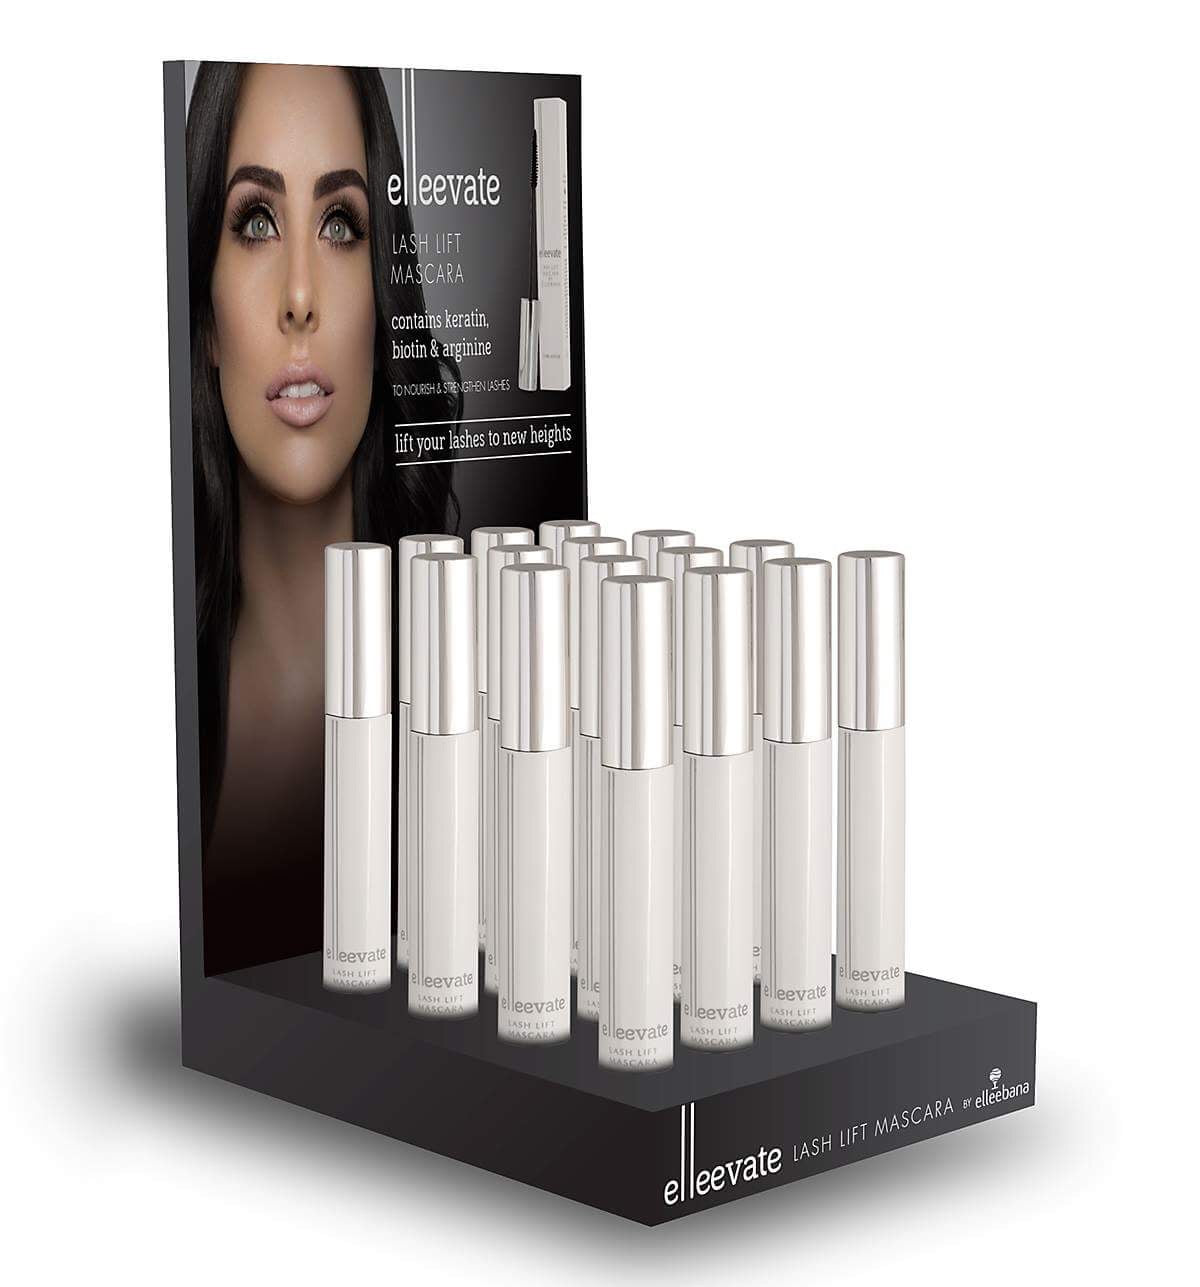 Elleevate Mascara 16 count Wholesale Pricing (Display Case Sold Separately)